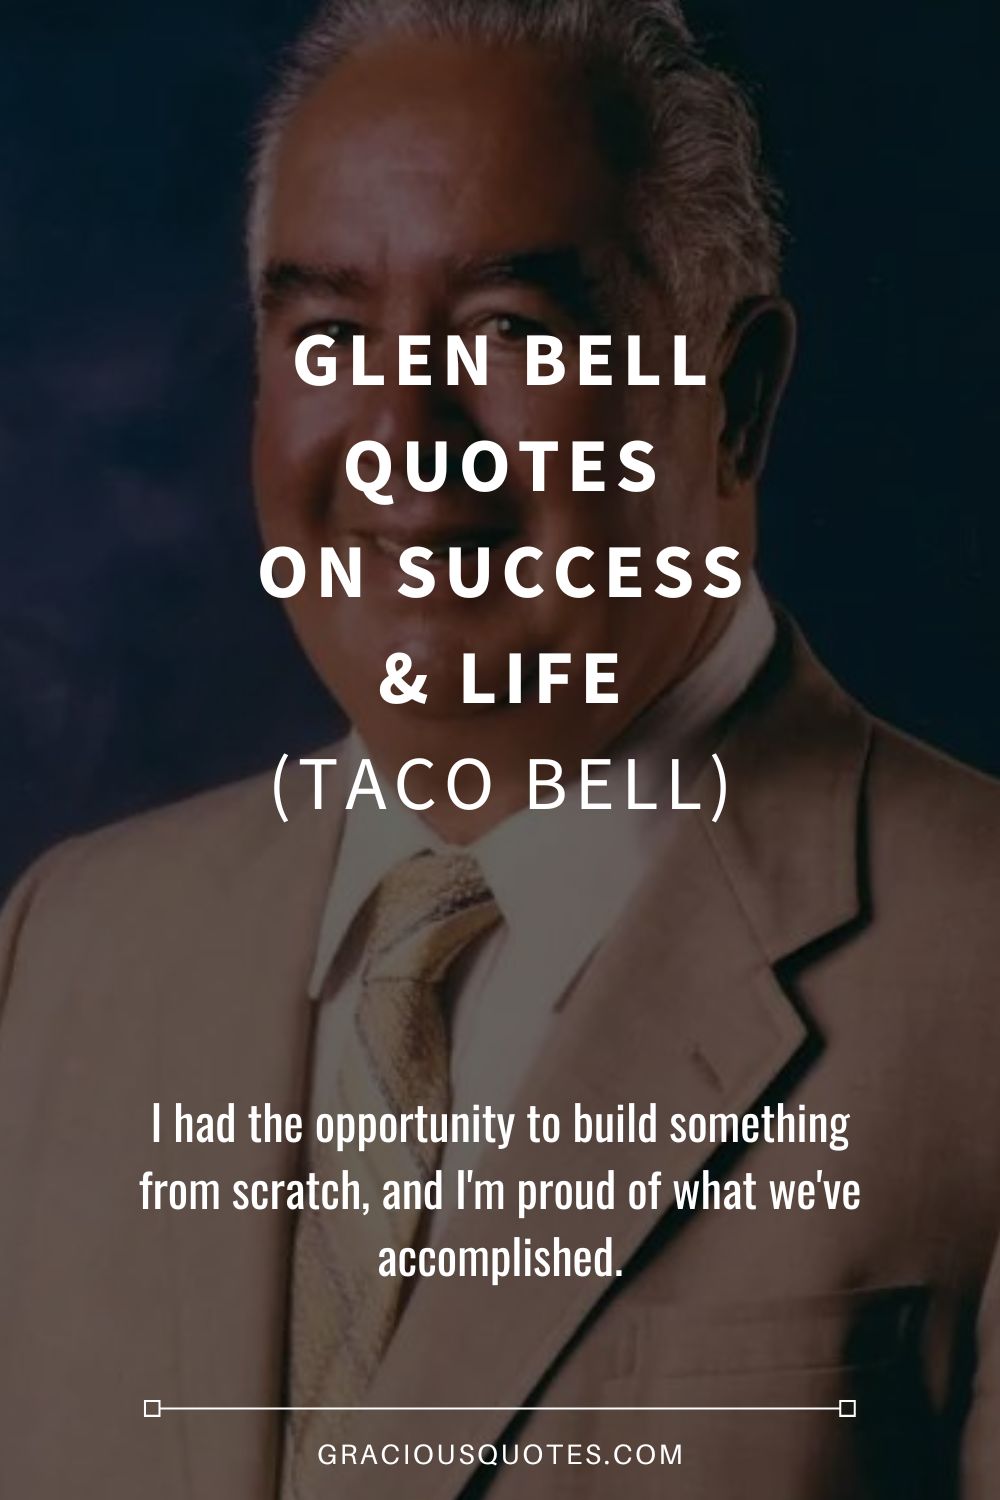 Glen Bell Quotes on Success & Life (TACO BELL) - Gracious Quotes